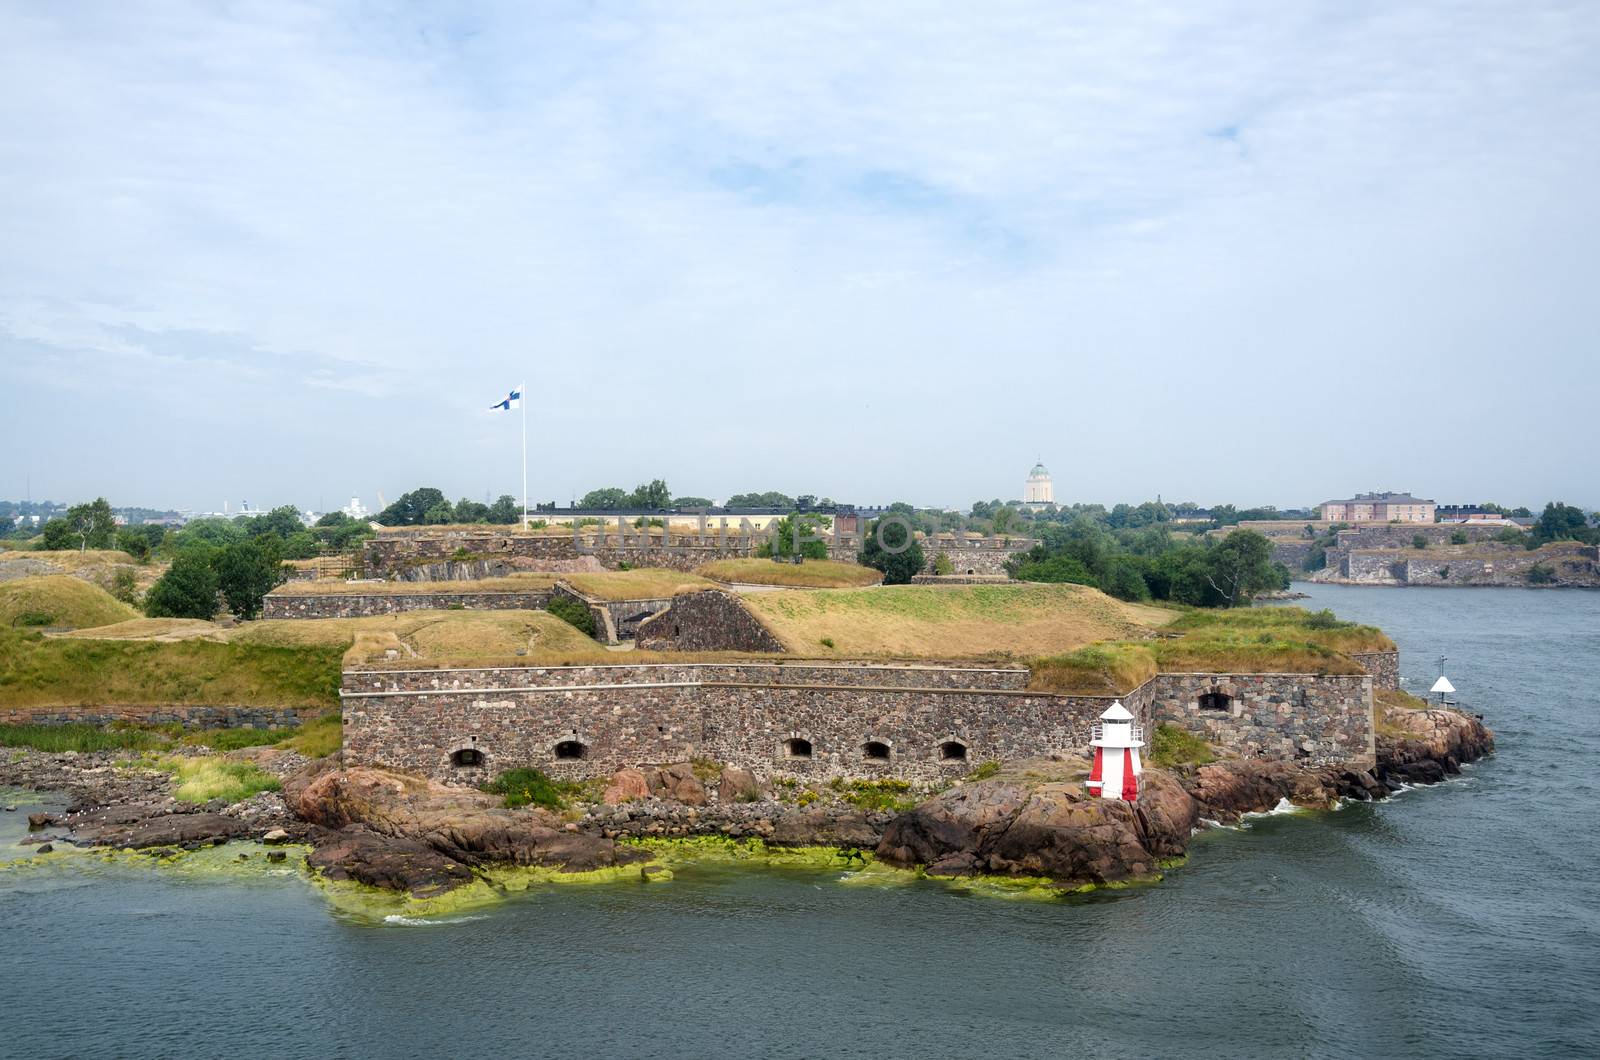 Fortress of Suomenlinna by maisicon